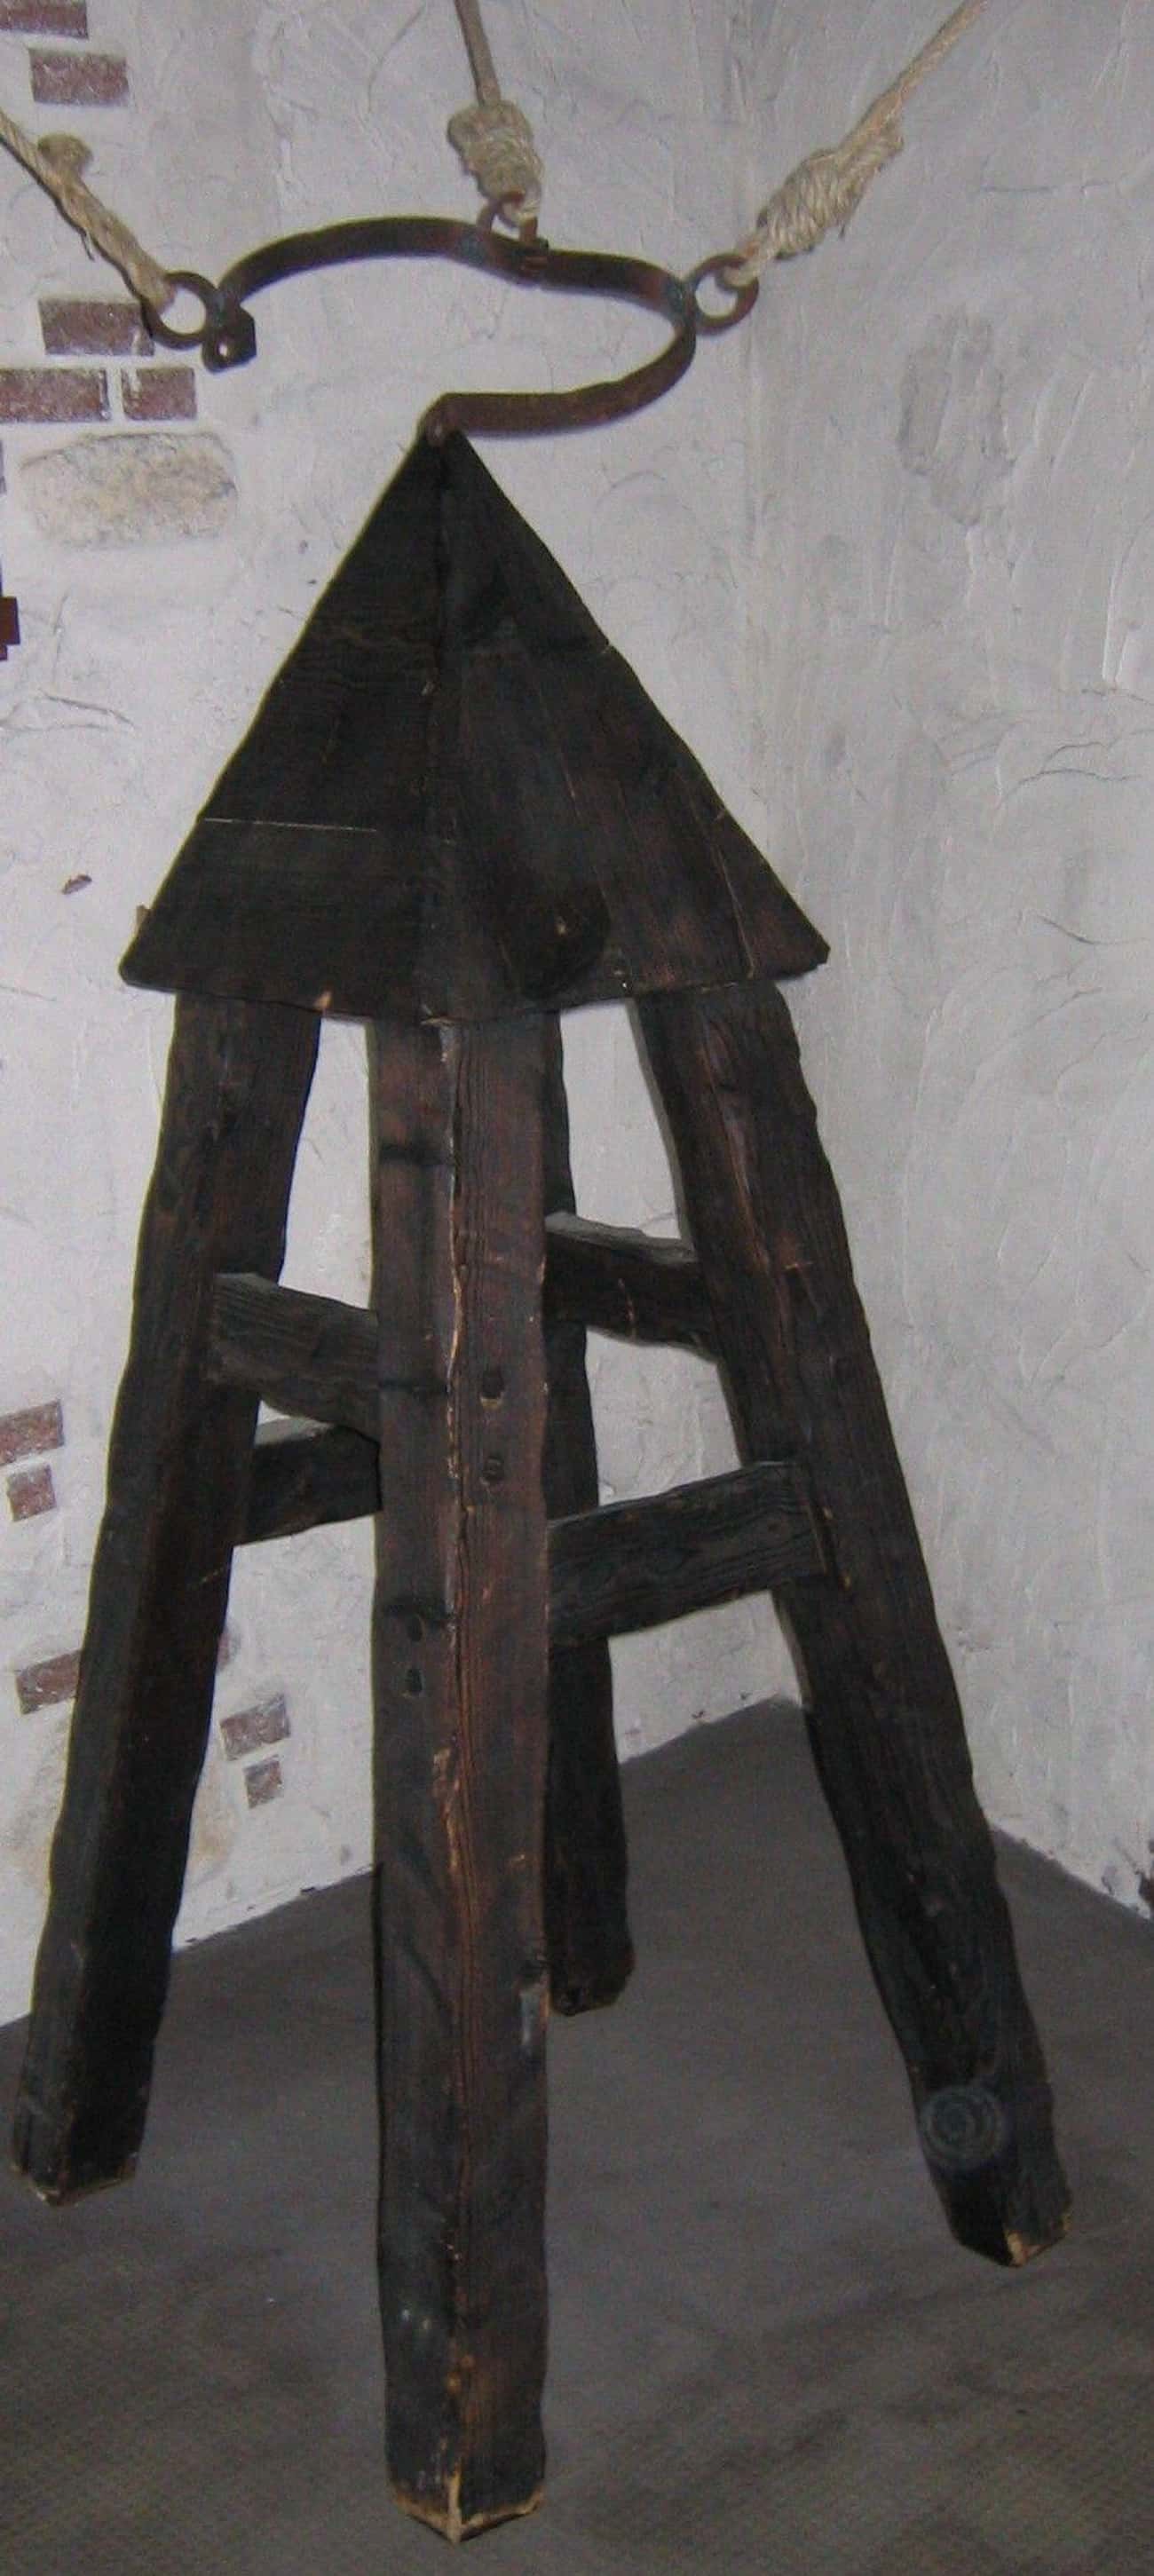 The Judas Cradle Would Literally Rip You A New Butthole